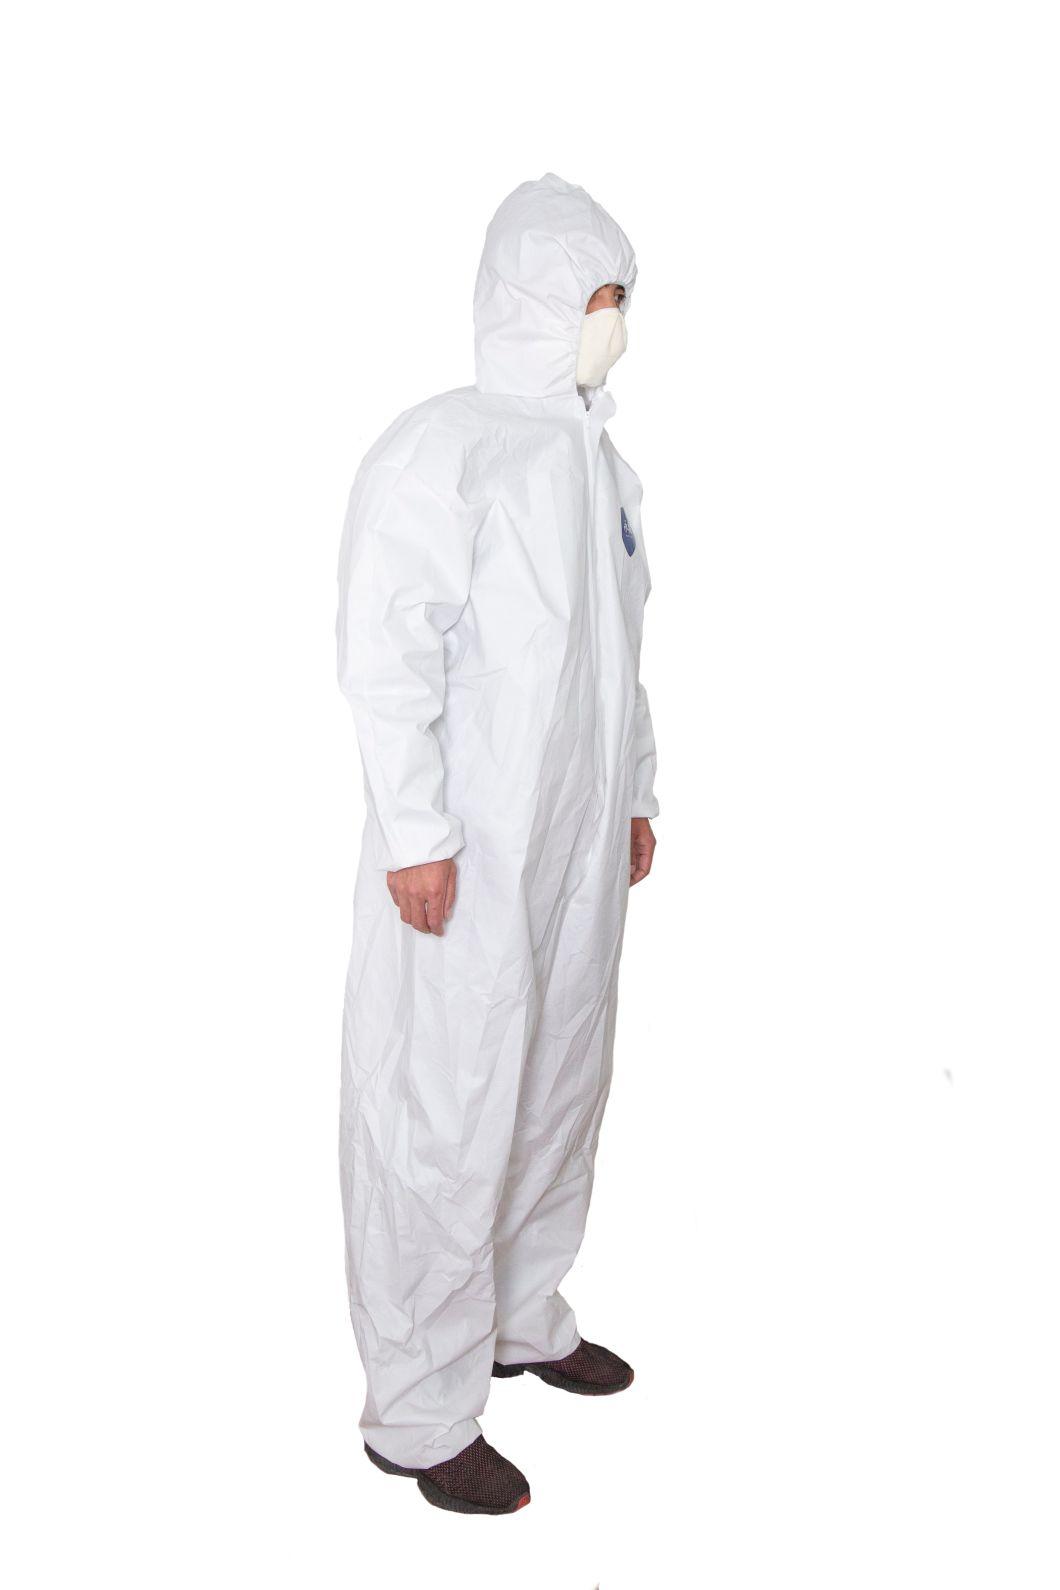 Protective Gown Disposable Plastic Body Suit Medical Protective Clothing